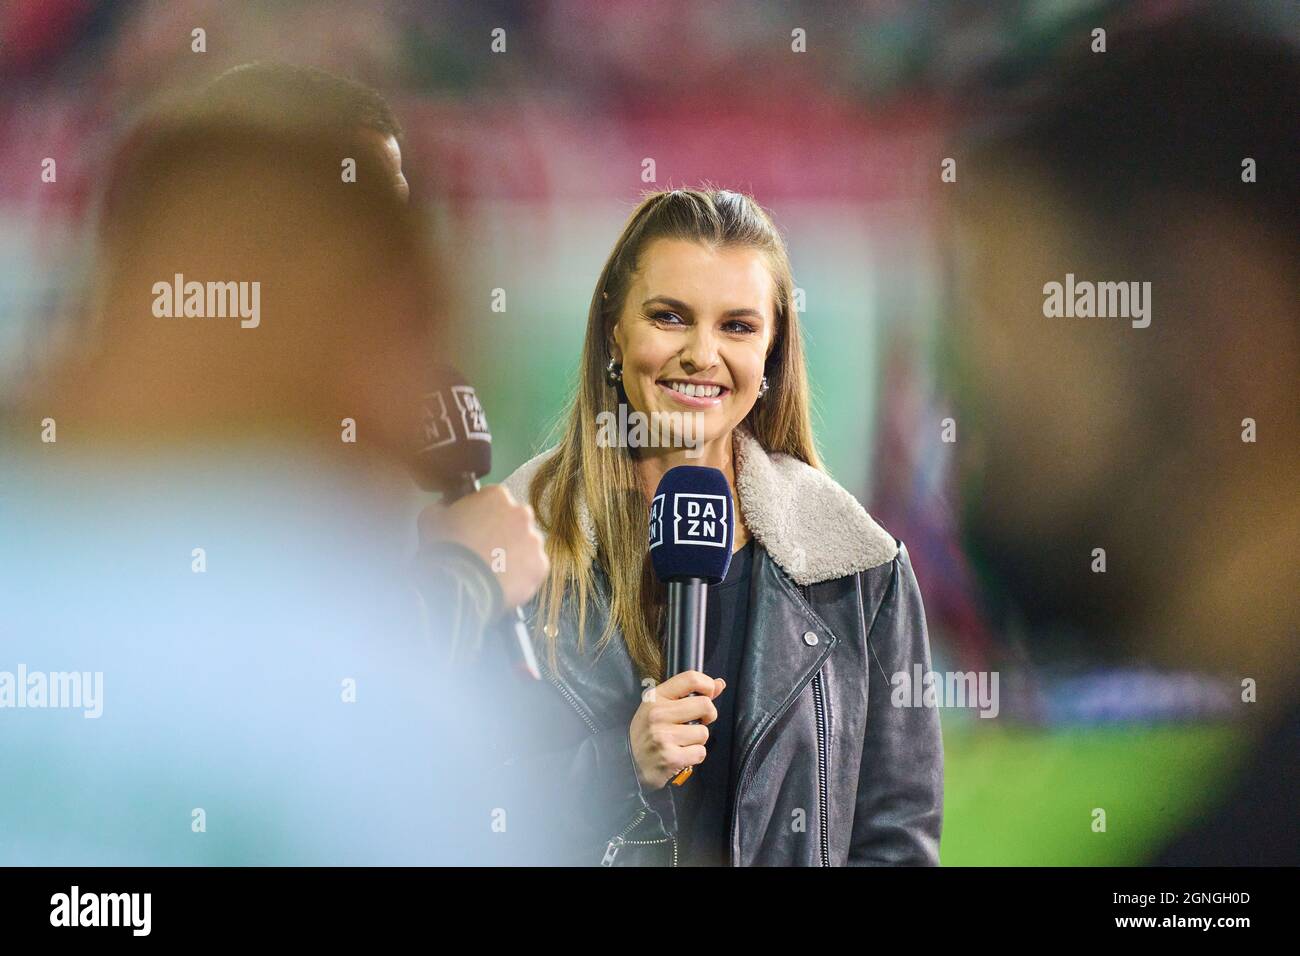 Laura WONTORRA, sports presenter, reporter, woman, moderator, TV, television, DAZN in the match SpVgg GREUTHER FÜRTH - FC BAYERN MUENCHEN 1-3 1.German Football League on September 24, 2021 in Fuerth, Germany. Season 2021/2022, matchday 7, 1.Bundesliga, FCB, München, 7.Spieltag. © Peter Schatz / Alamy Live News    - DFL REGULATIONS PROHIBIT ANY USE OF PHOTOGRAPHS as IMAGE SEQUENCES and/or QUASI-VIDEO - Stock Photo